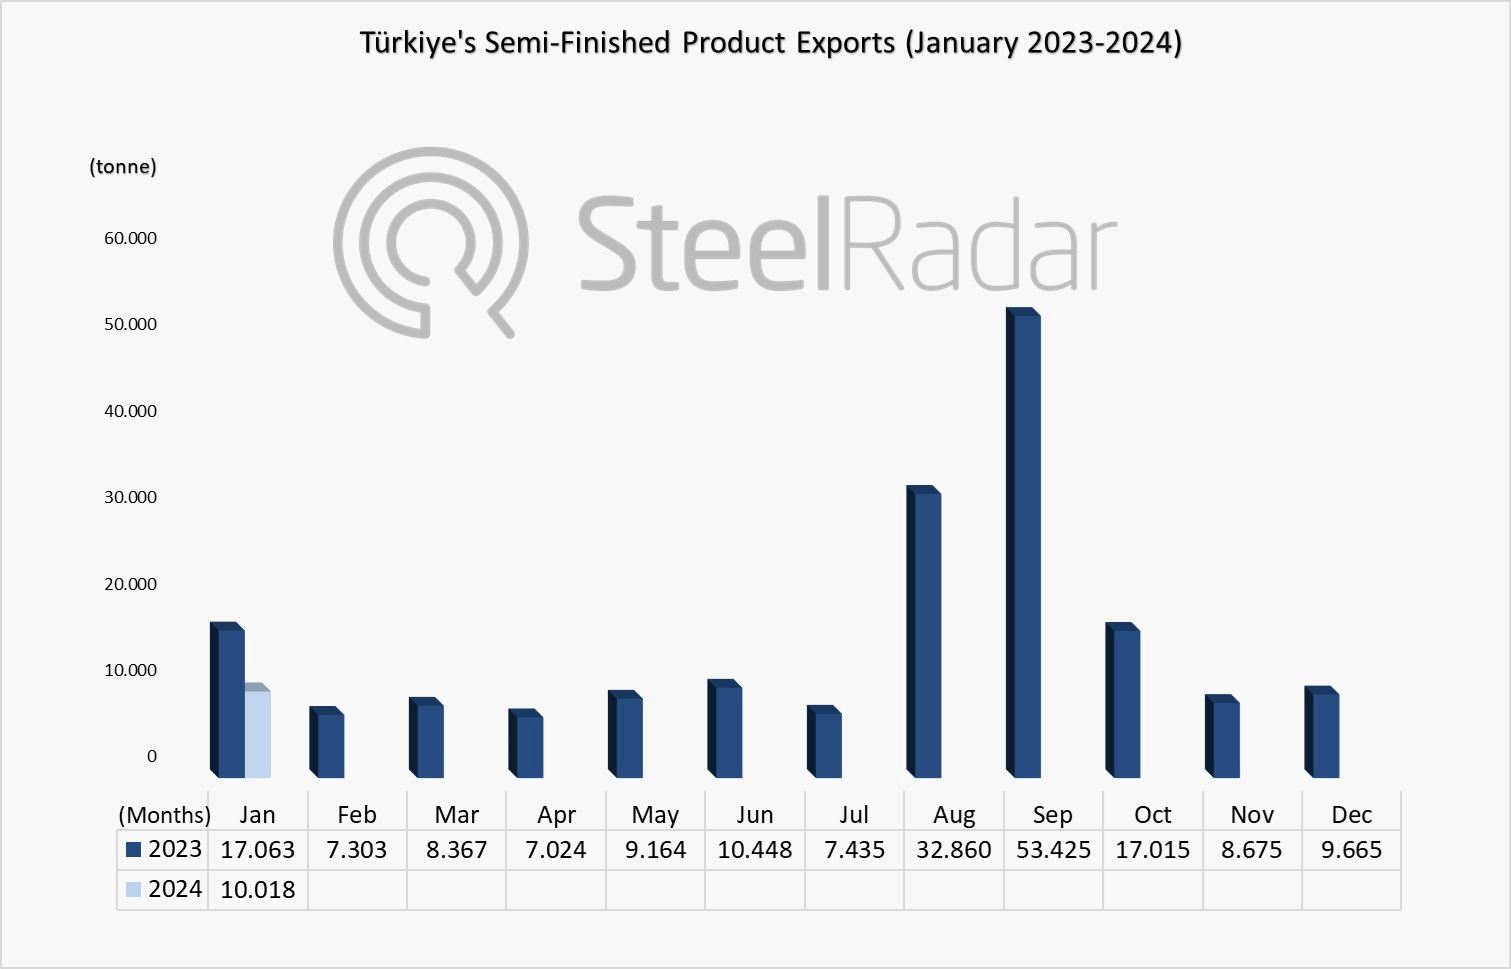 Türkiye's exports of semi-finished products decreased by 41.3% in January